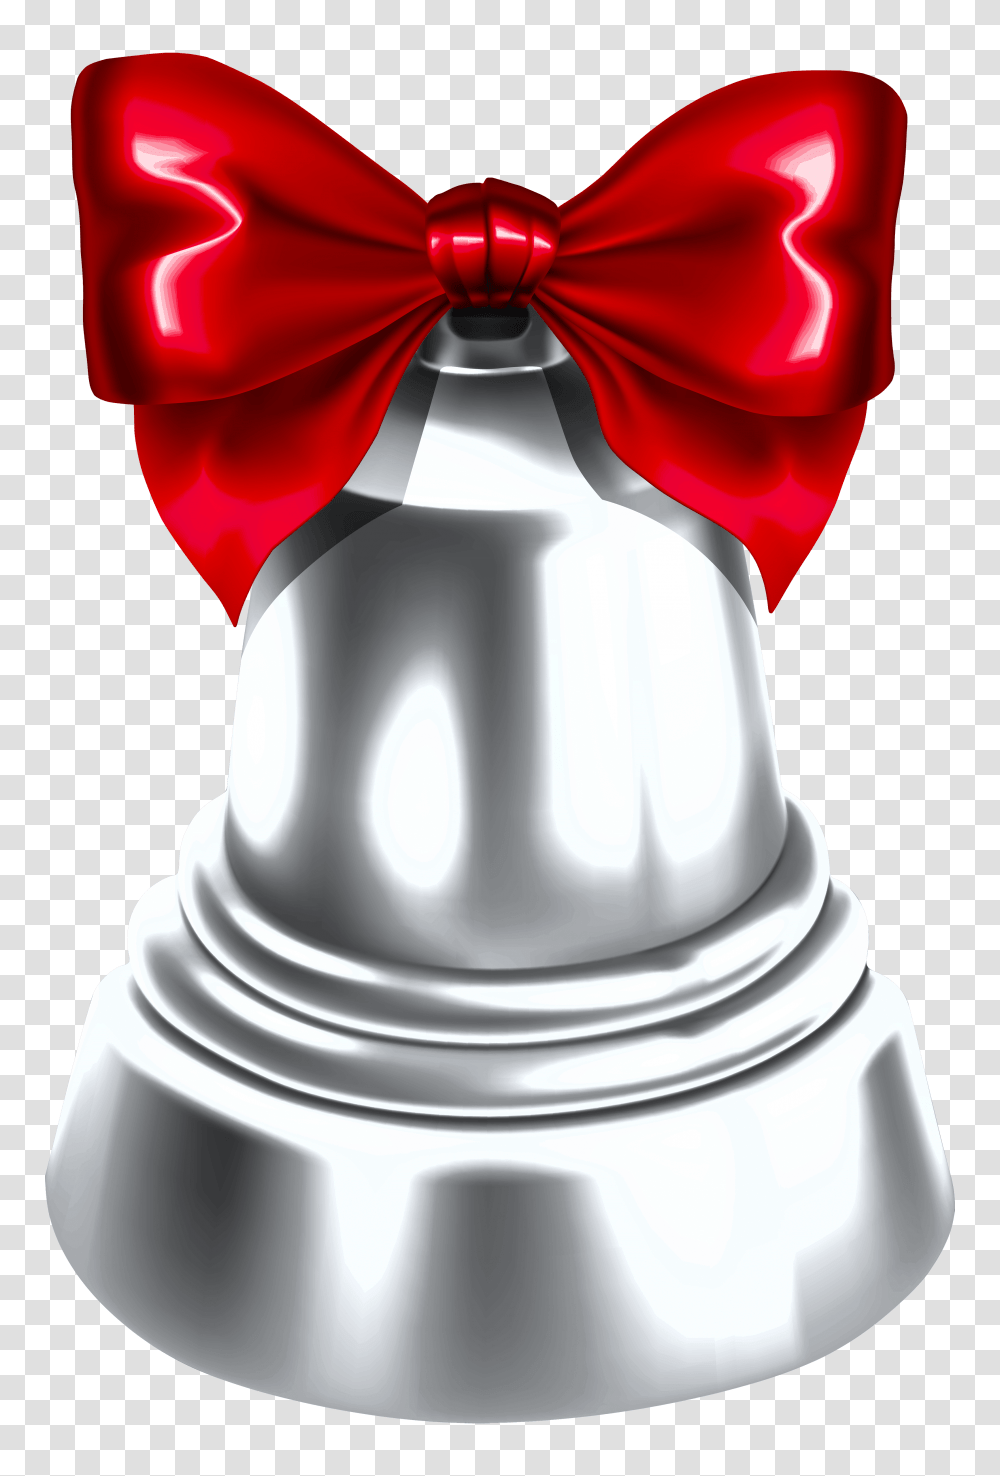 Silver Bell Cliparts, Wedding Cake, Dessert, Food, Birthday Cake Transparent Png